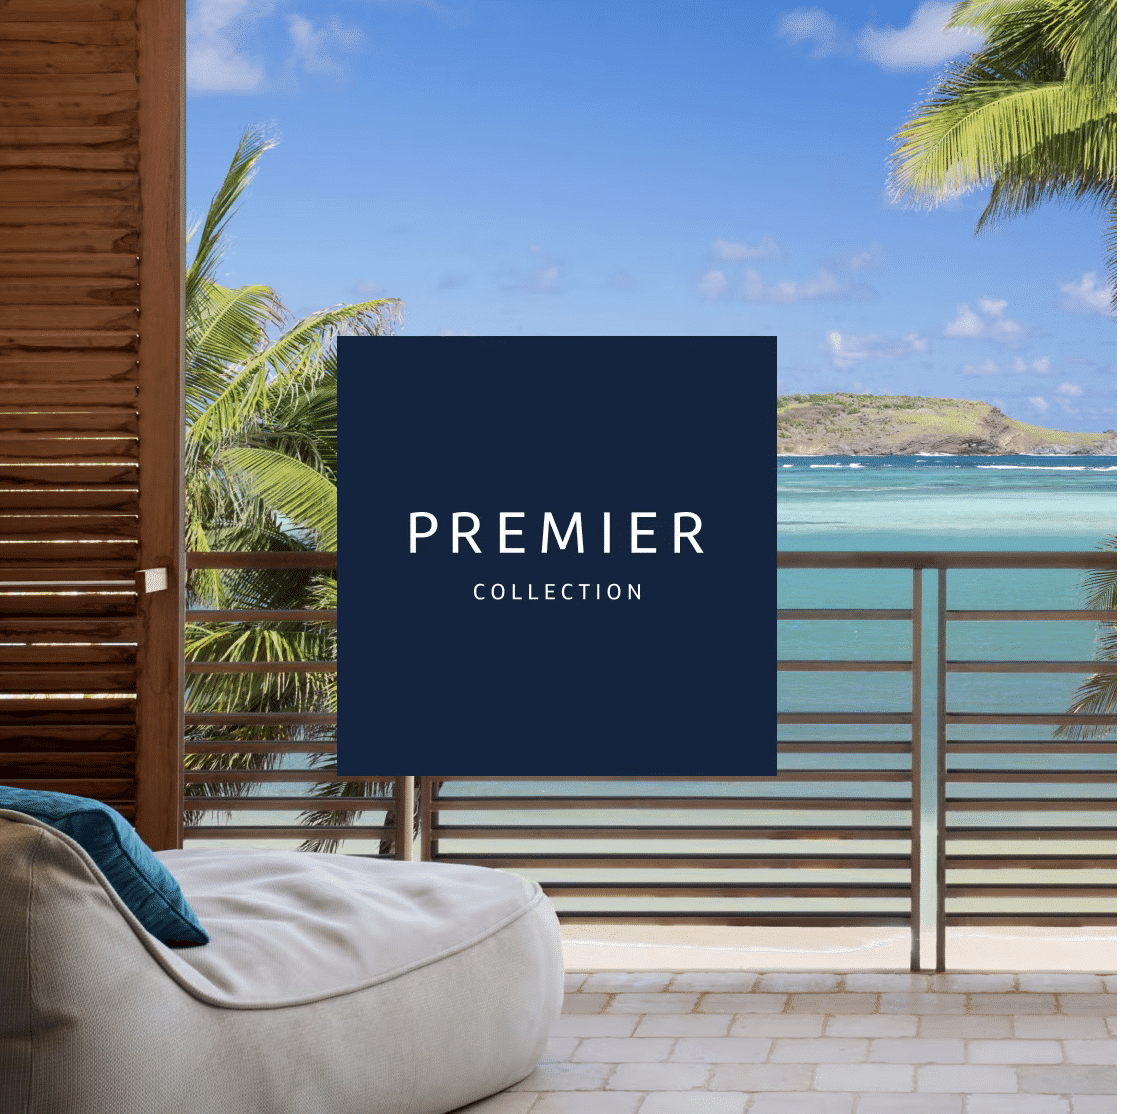 capital one premier collection hotels logo on tropical background